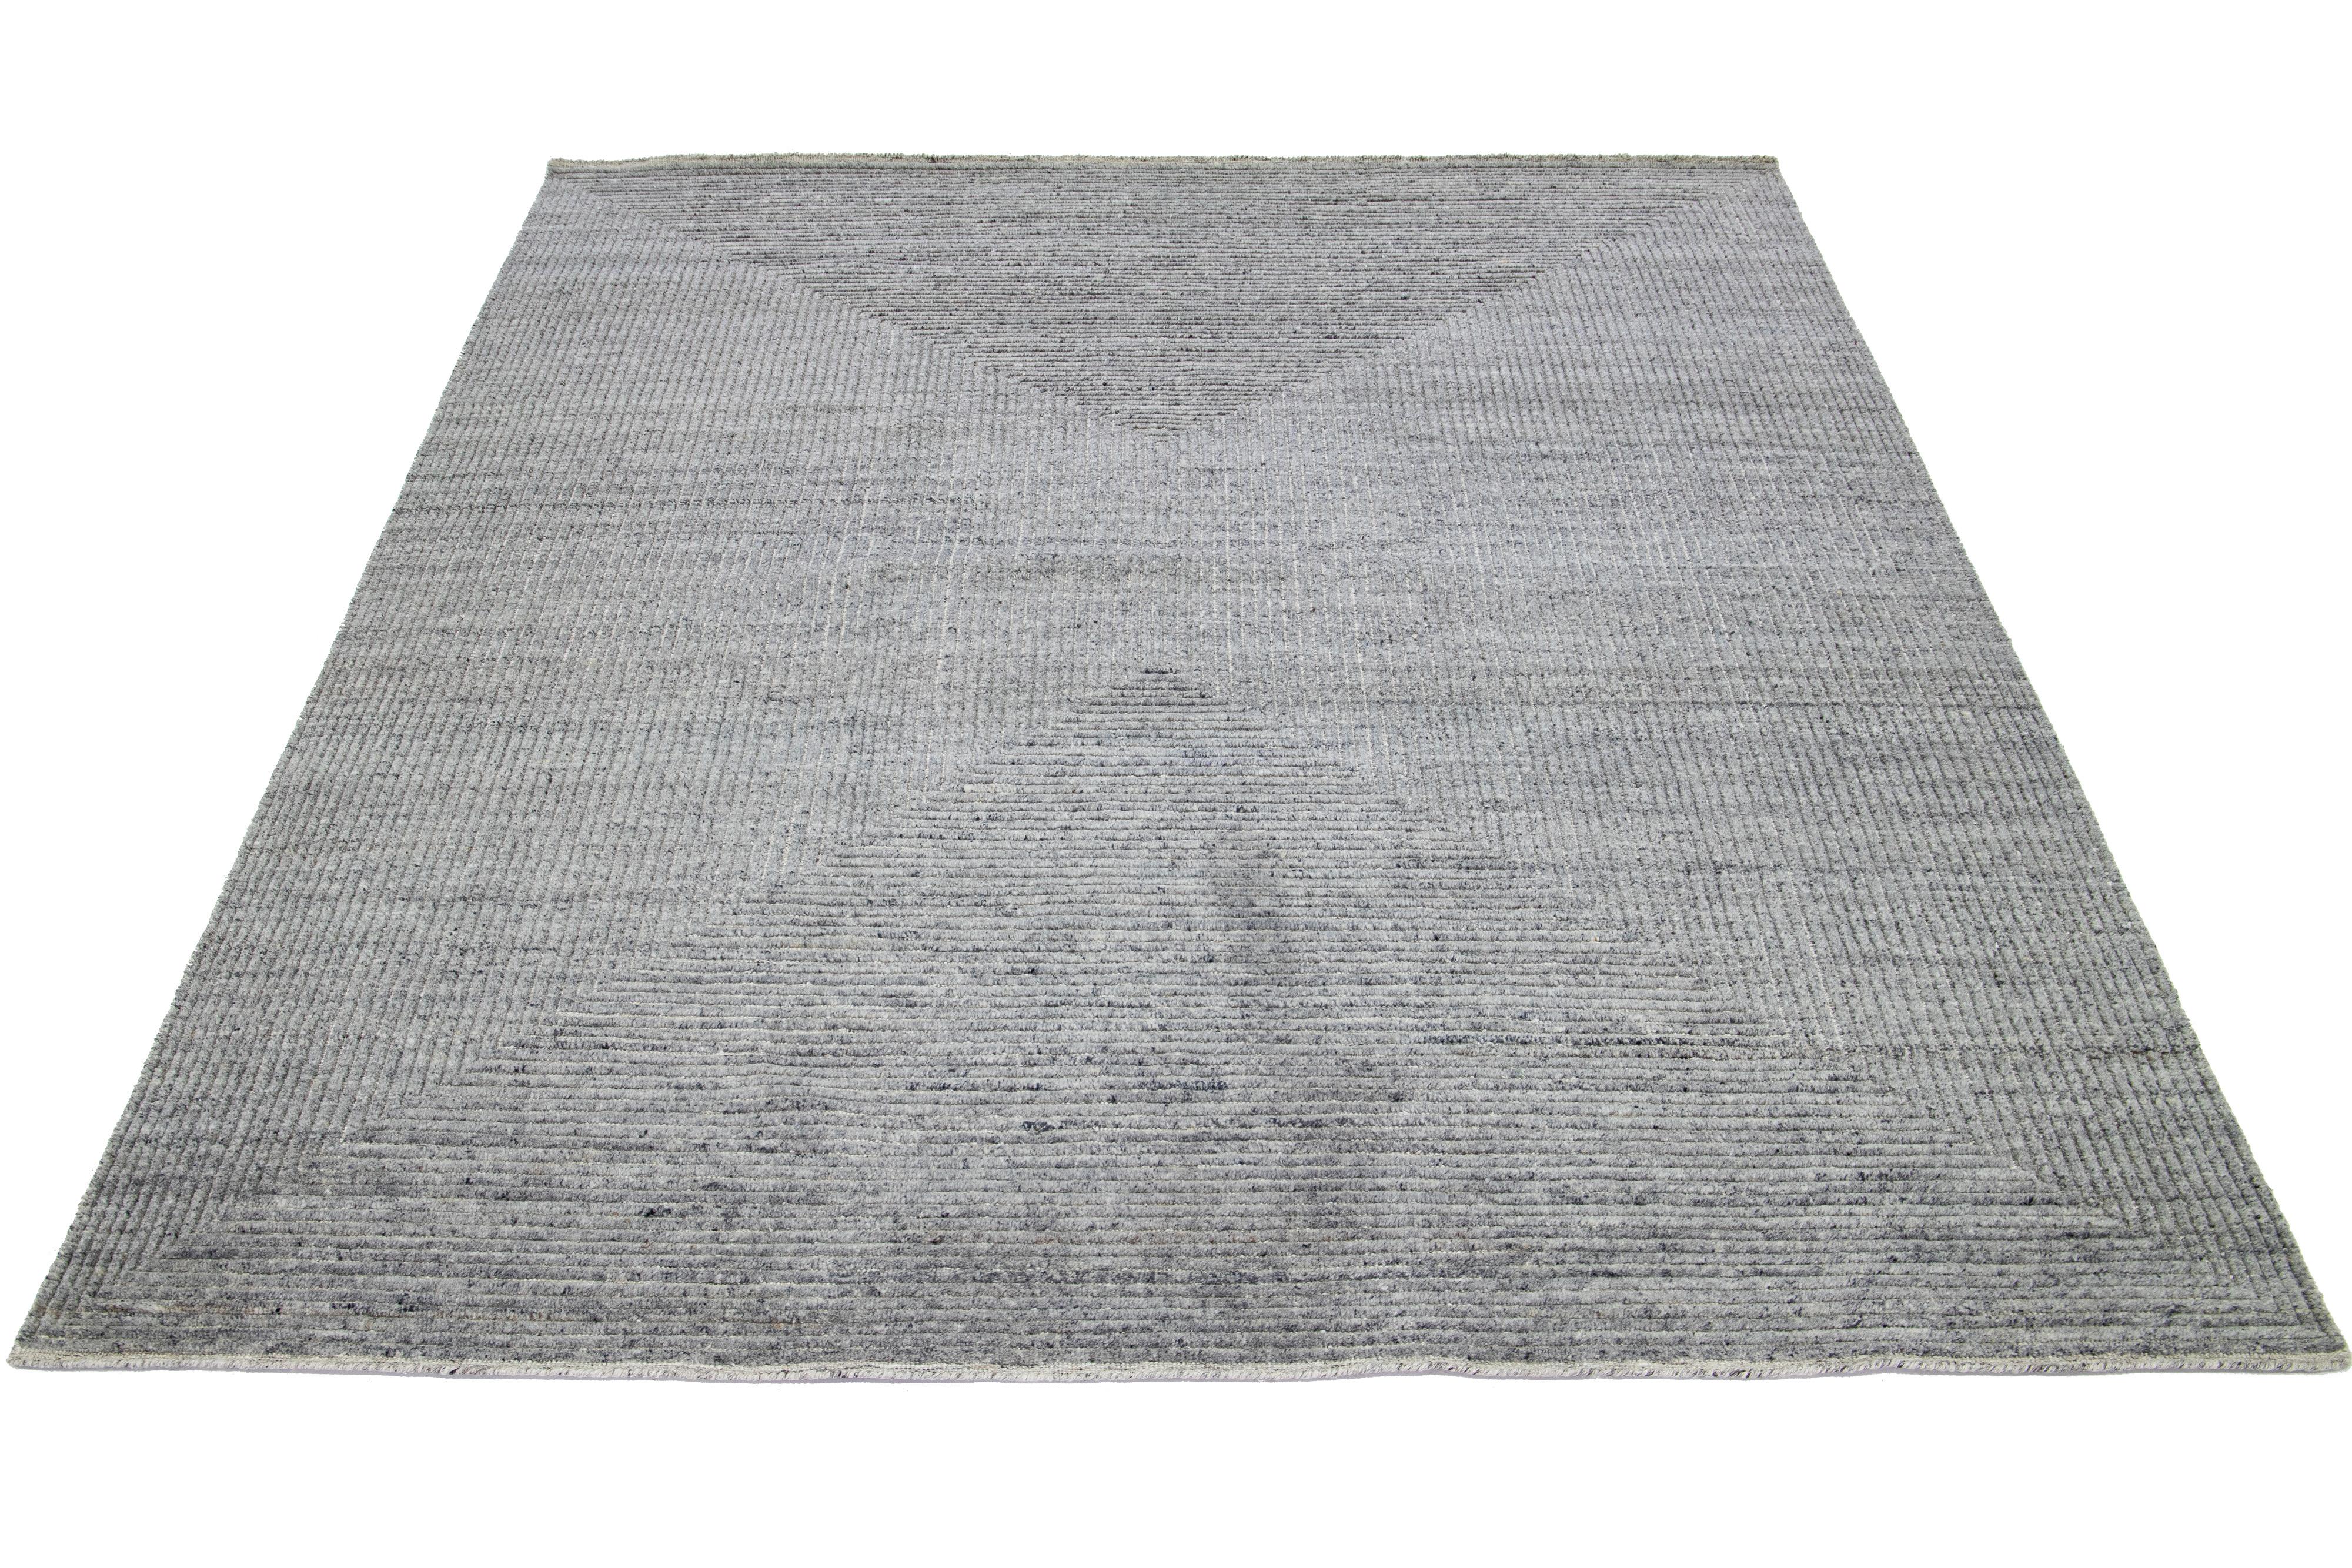 This hand-knotted Moroccan wool rug exhibits an Organic Modern style, featuring a geometric design in hues of light gray.

This rug measures 7'11